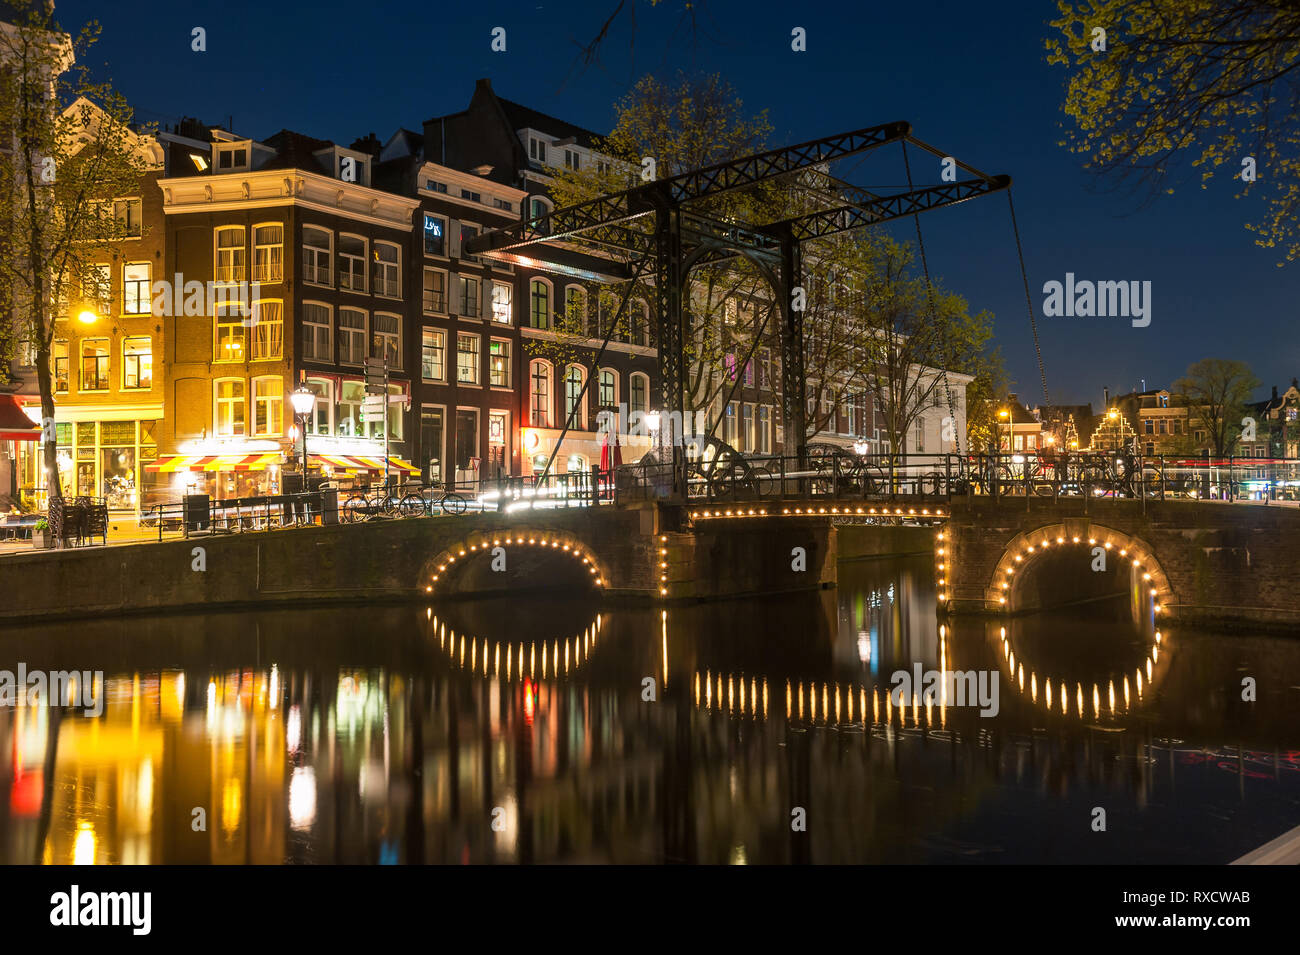 Night landscape with houses and canal in Amsterdam, light reflection in water, cityscape Stock Photo